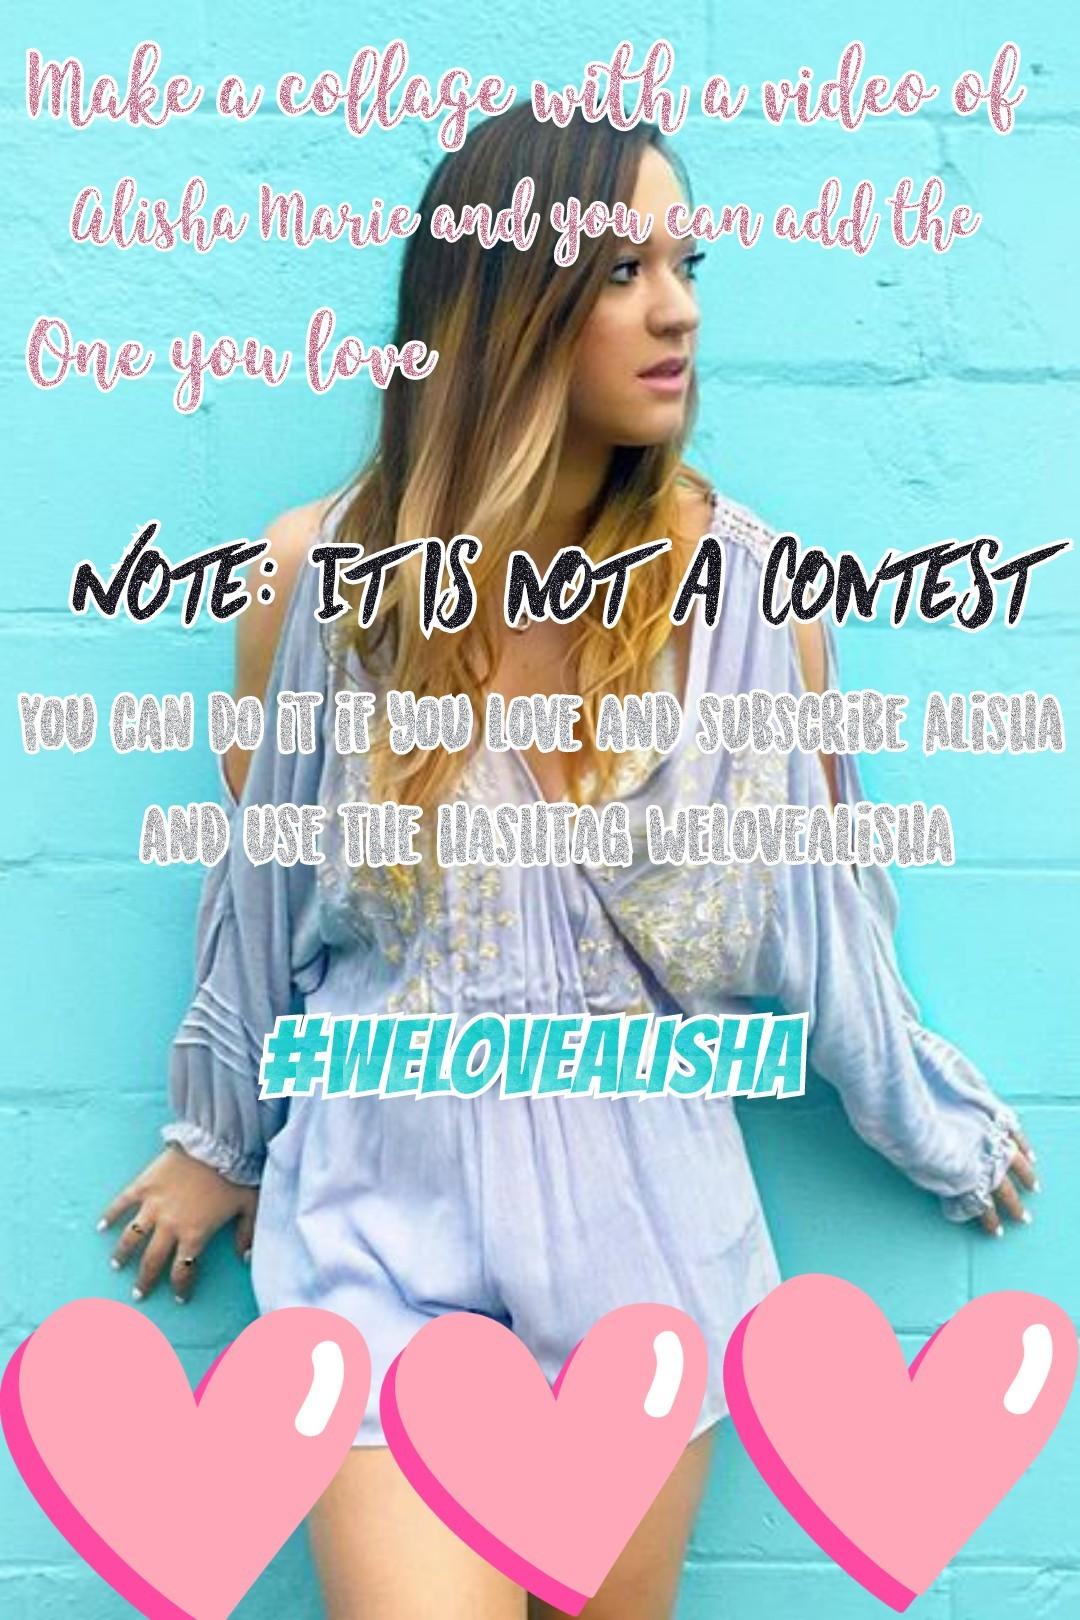 #welovealisha  tap
Happy forever! yes it's time for YouTube to come in..... Come on add anything that is ur fav.... it's just in ur hands. and if you remix then u will get 2 likes of ur collages
Thank you